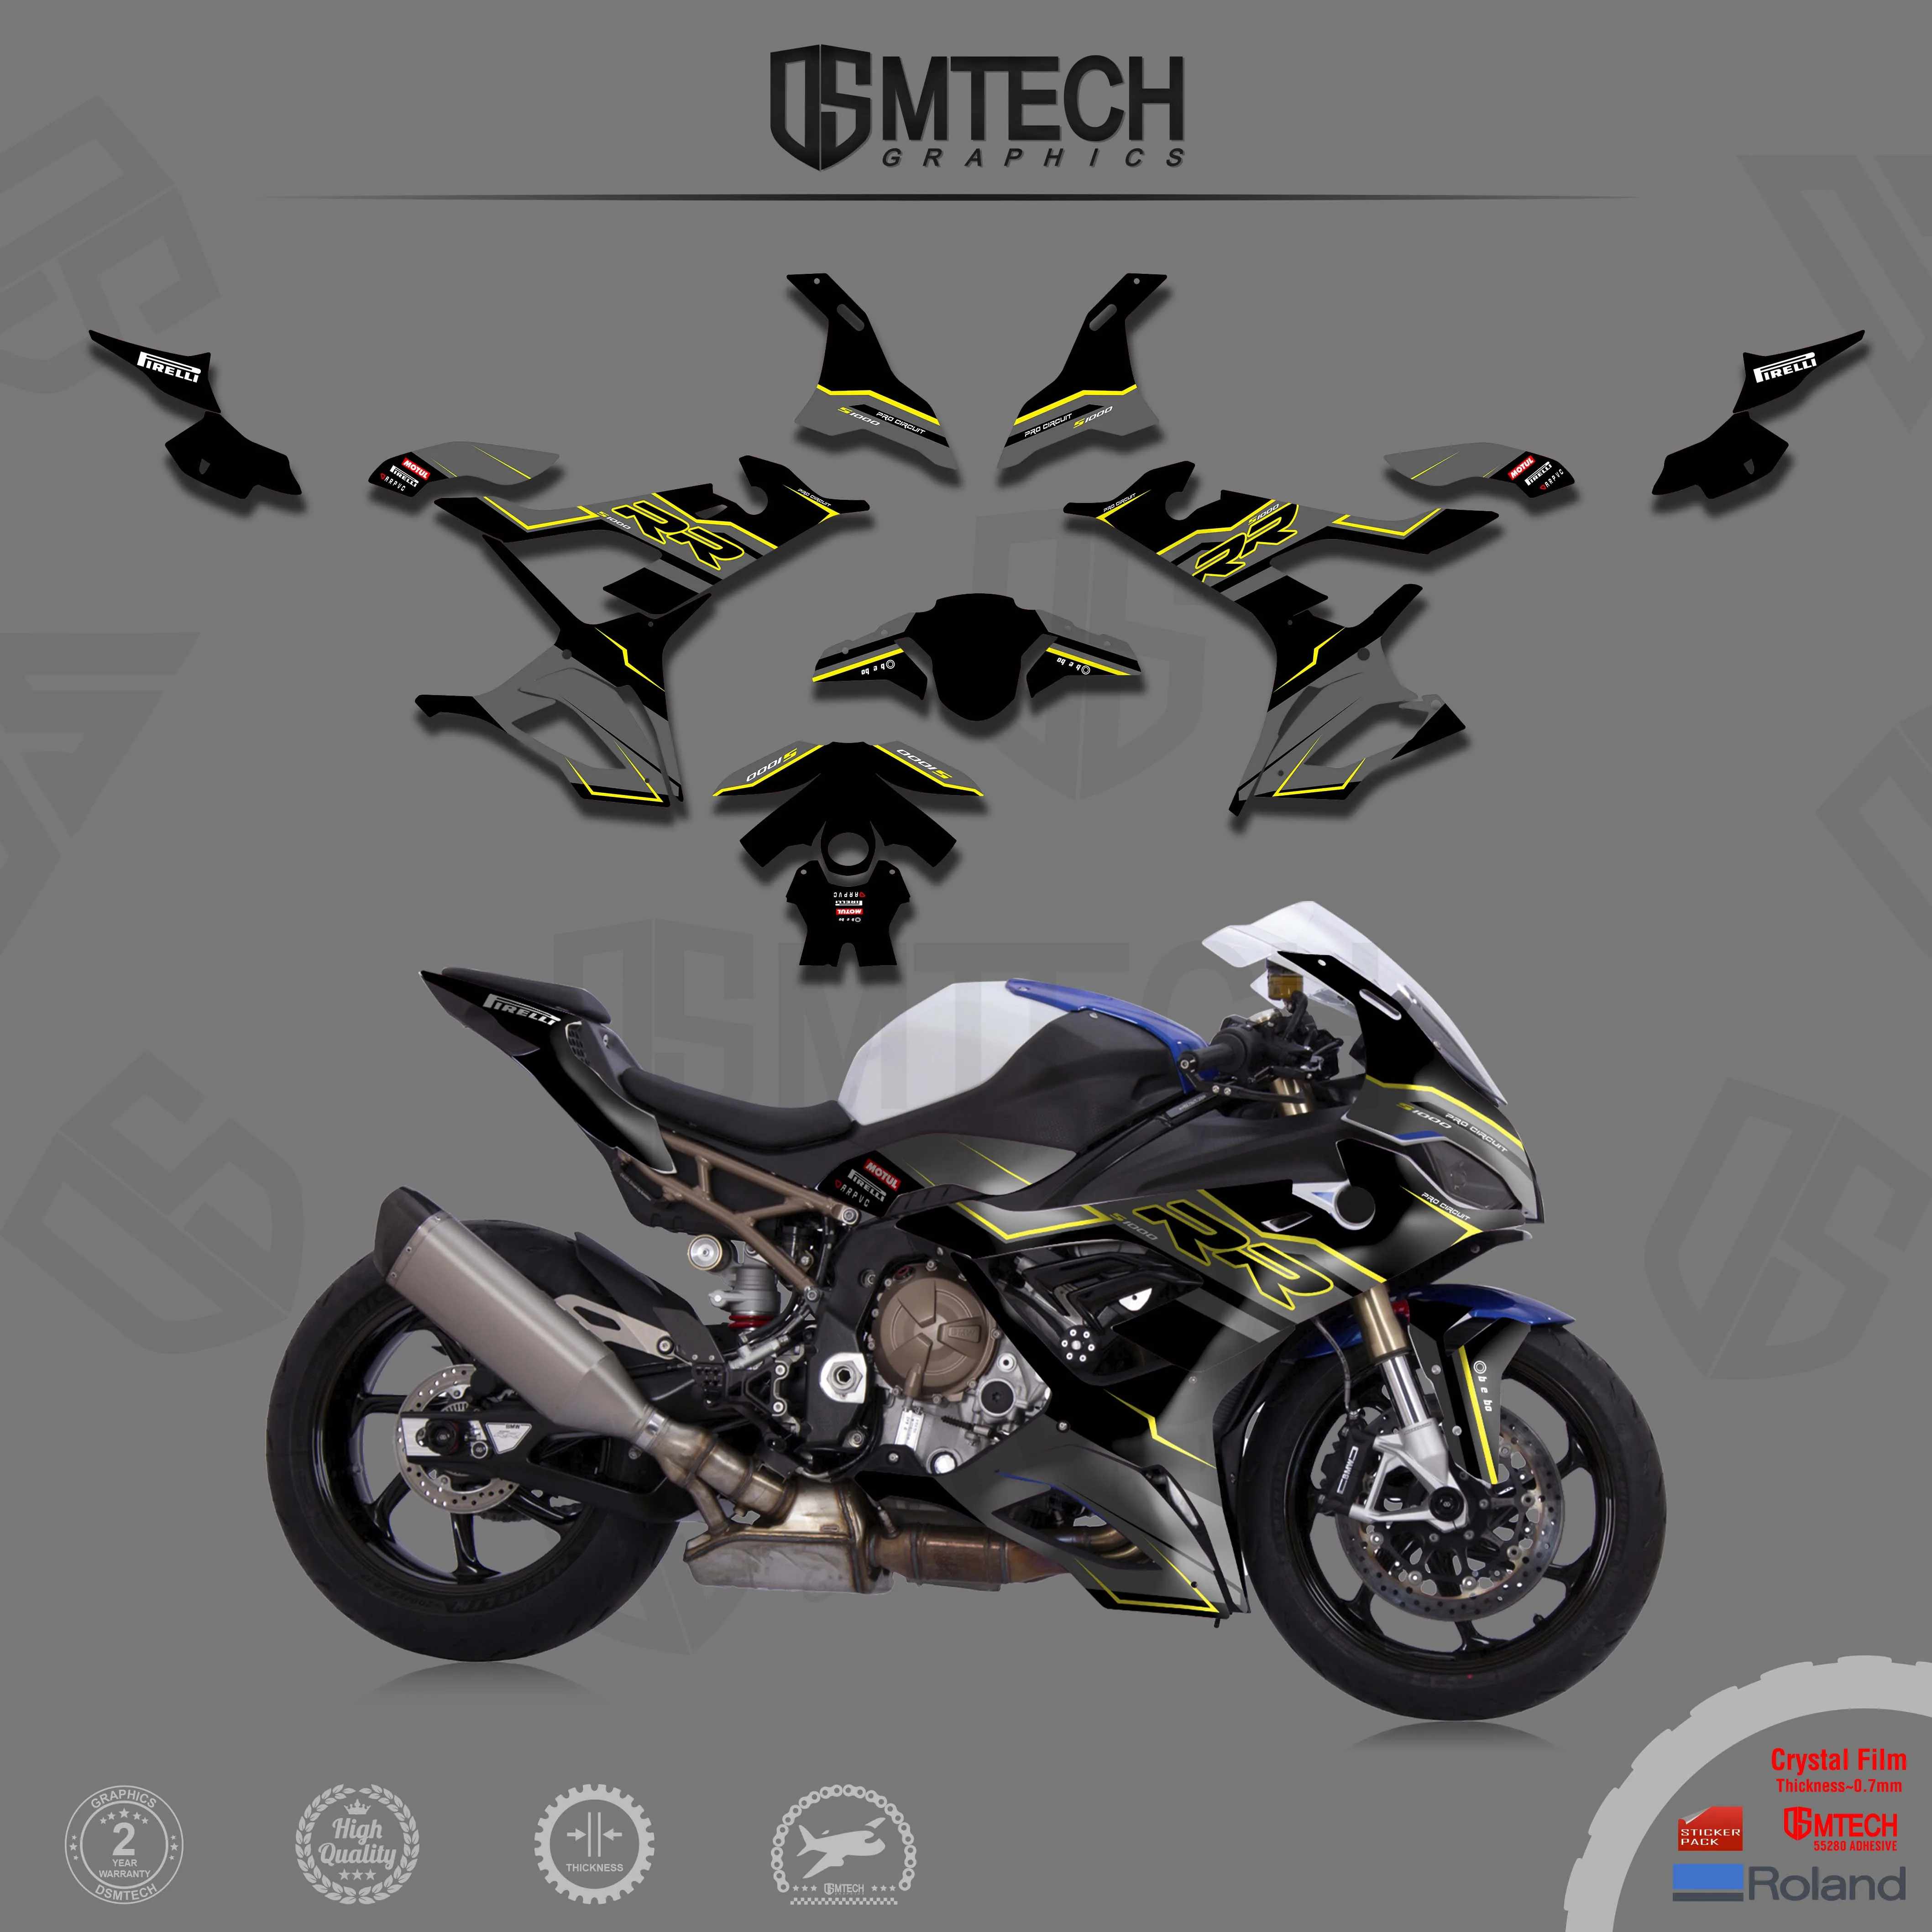 DSMTECH motorcycle Graphics Background Stickers Decals For BMW series 2019 2020 2021 2022 S1000 RR 22-19 001